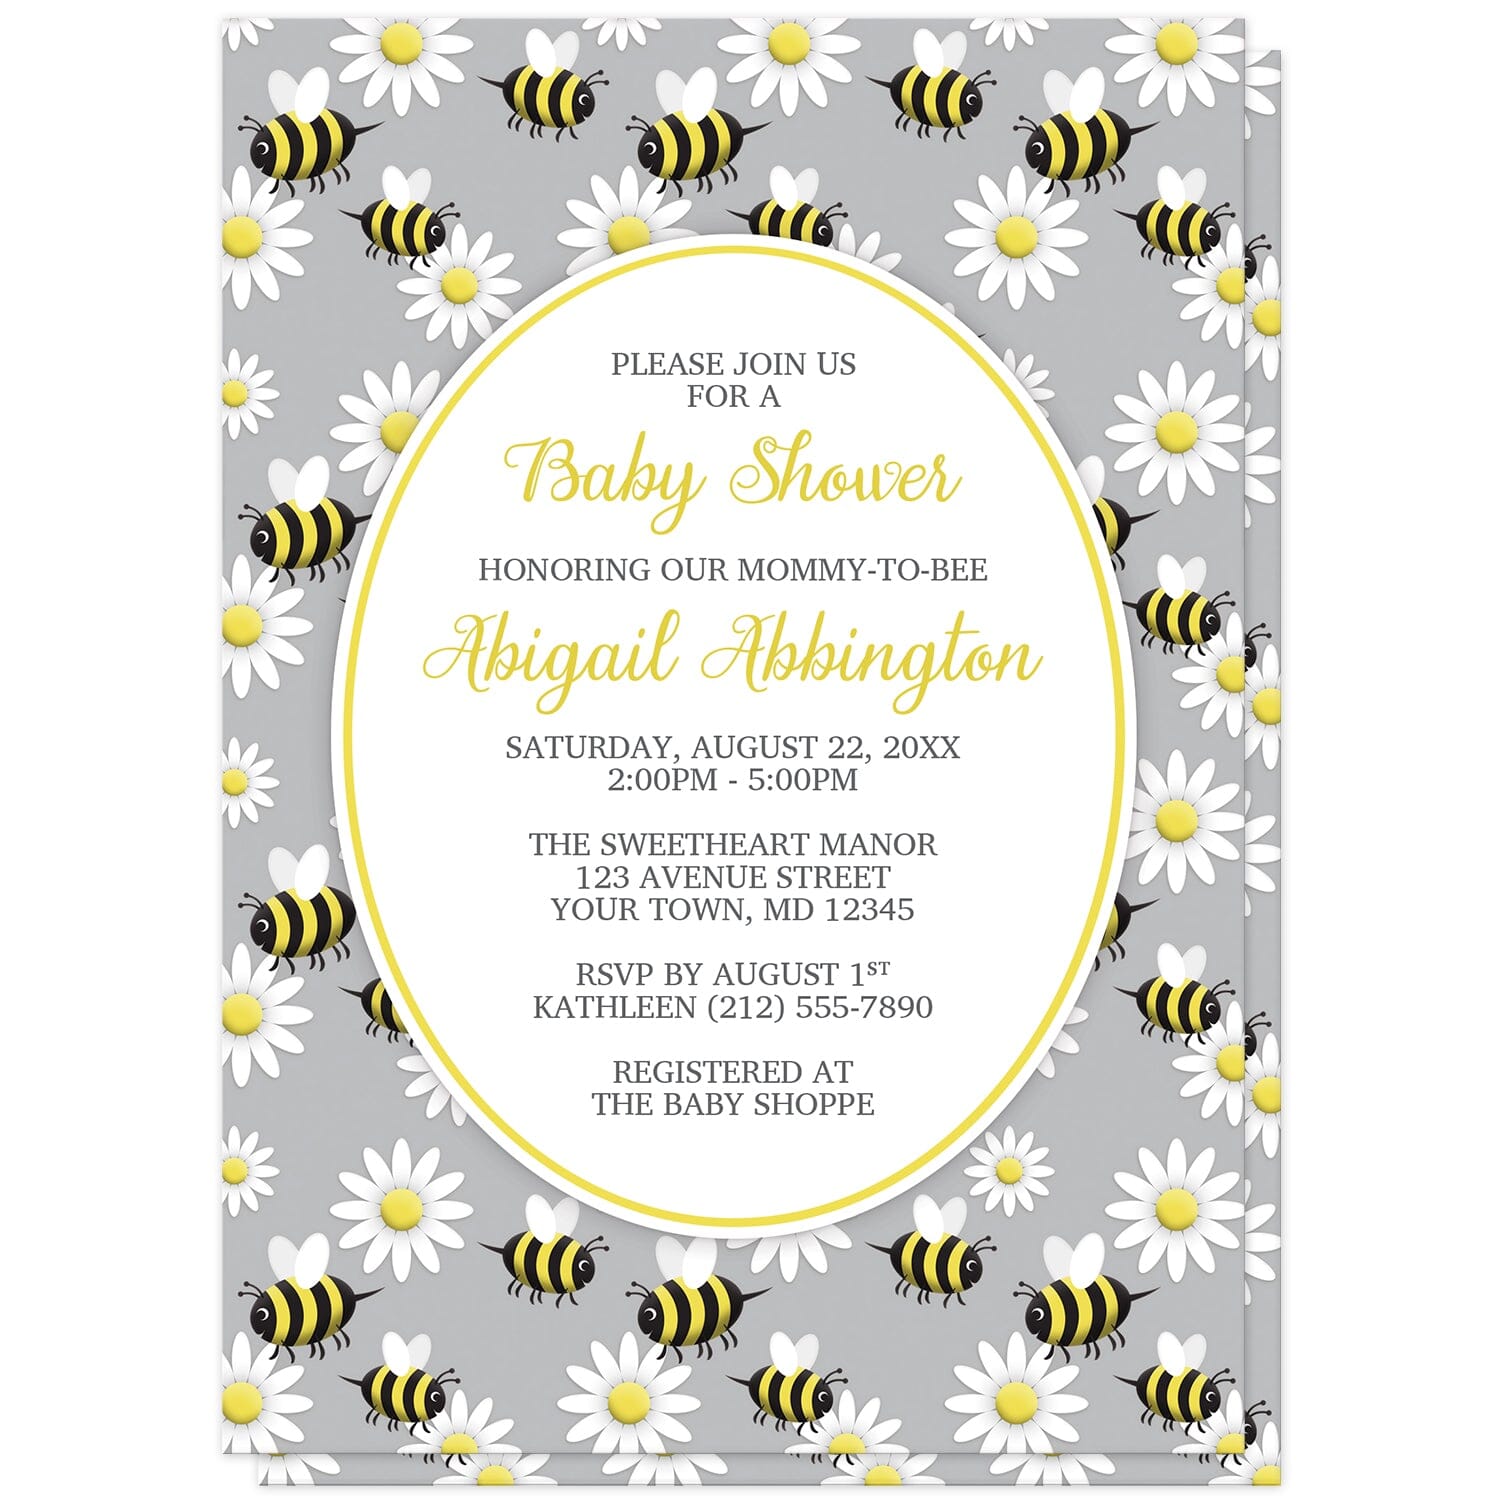 Happy Bee and Daisy Pattern Baby Shower Invitations at Artistically Invited. Happy bee and daisy pattern baby shower invitations with a background featuring a pattern of a yellow and black happy bees and white daisy flowers over gray. Your personalized baby shower celebration details are custom printed in yellow and dark gray in a white oval outlined in yellow in the center.